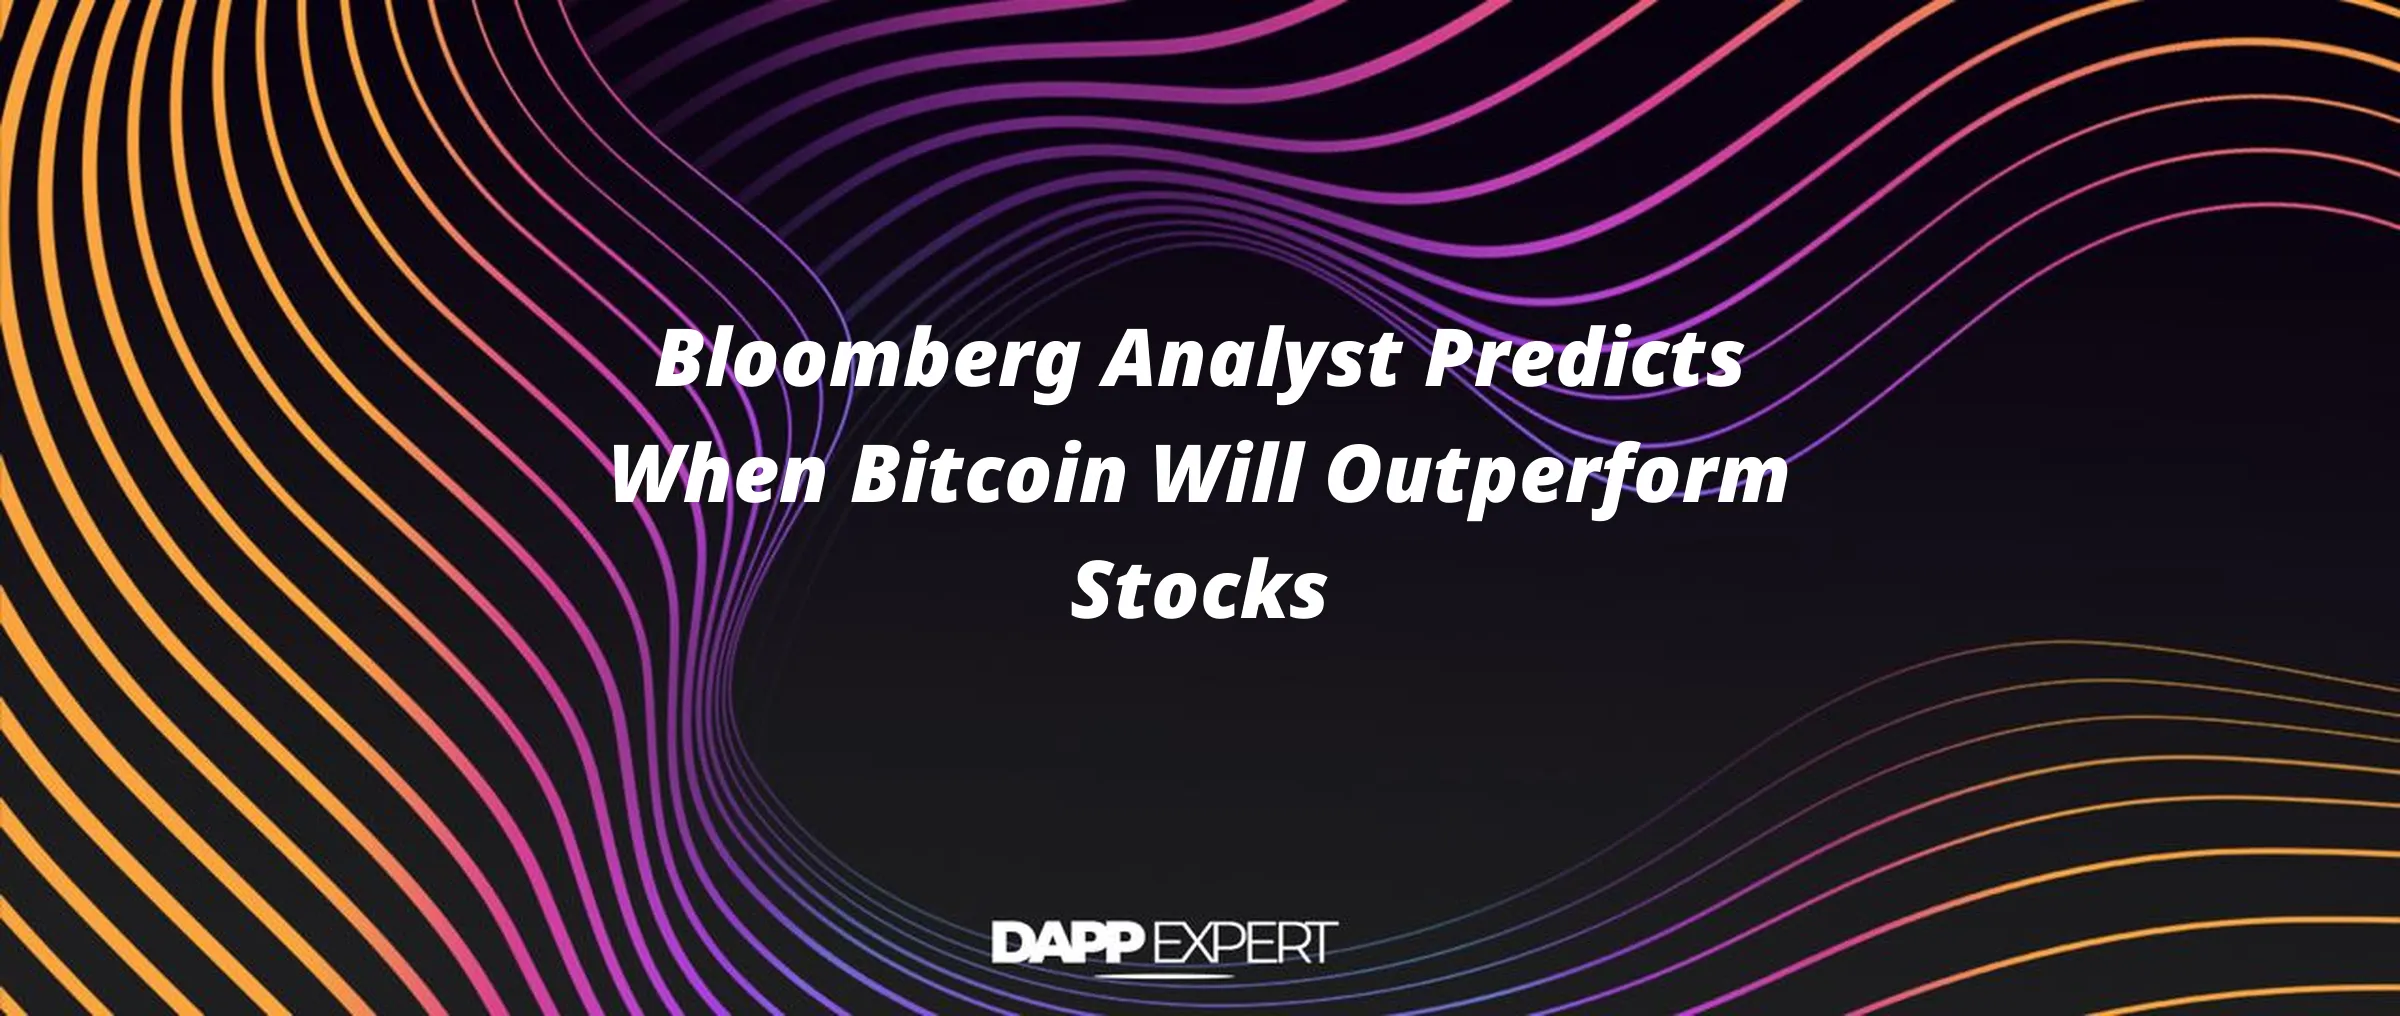 Bloomberg Analyst Predicts When Bitcoin Will Outperform Stocks